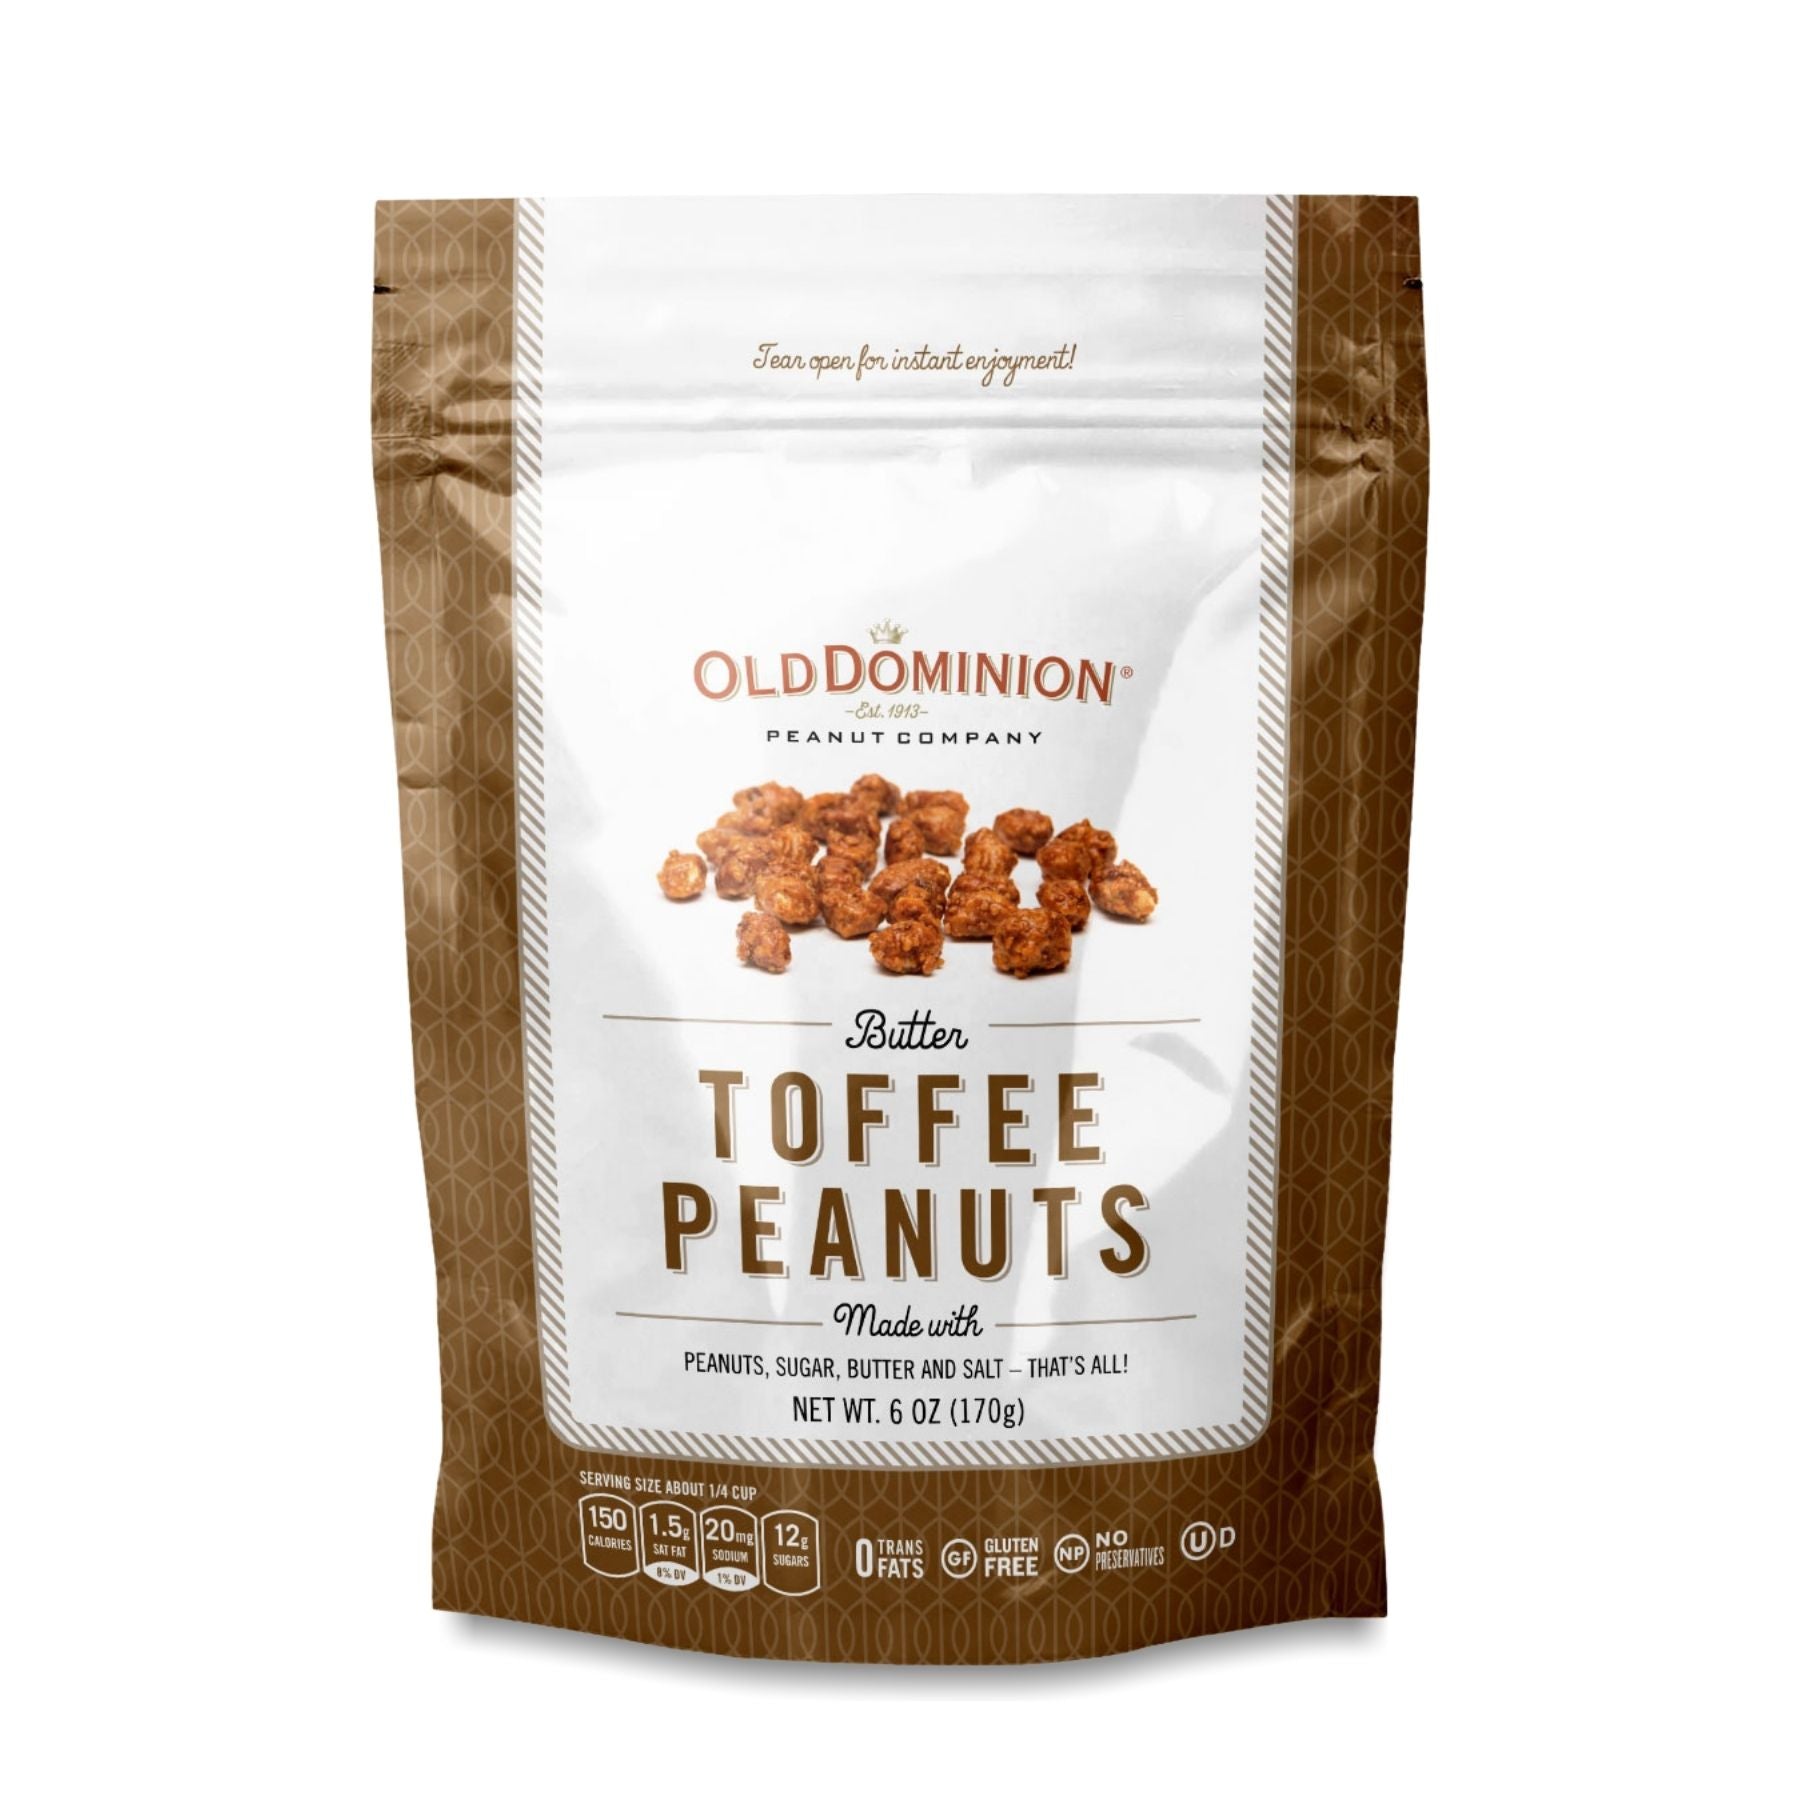 Old Dominion Butter Toffee Peanuts